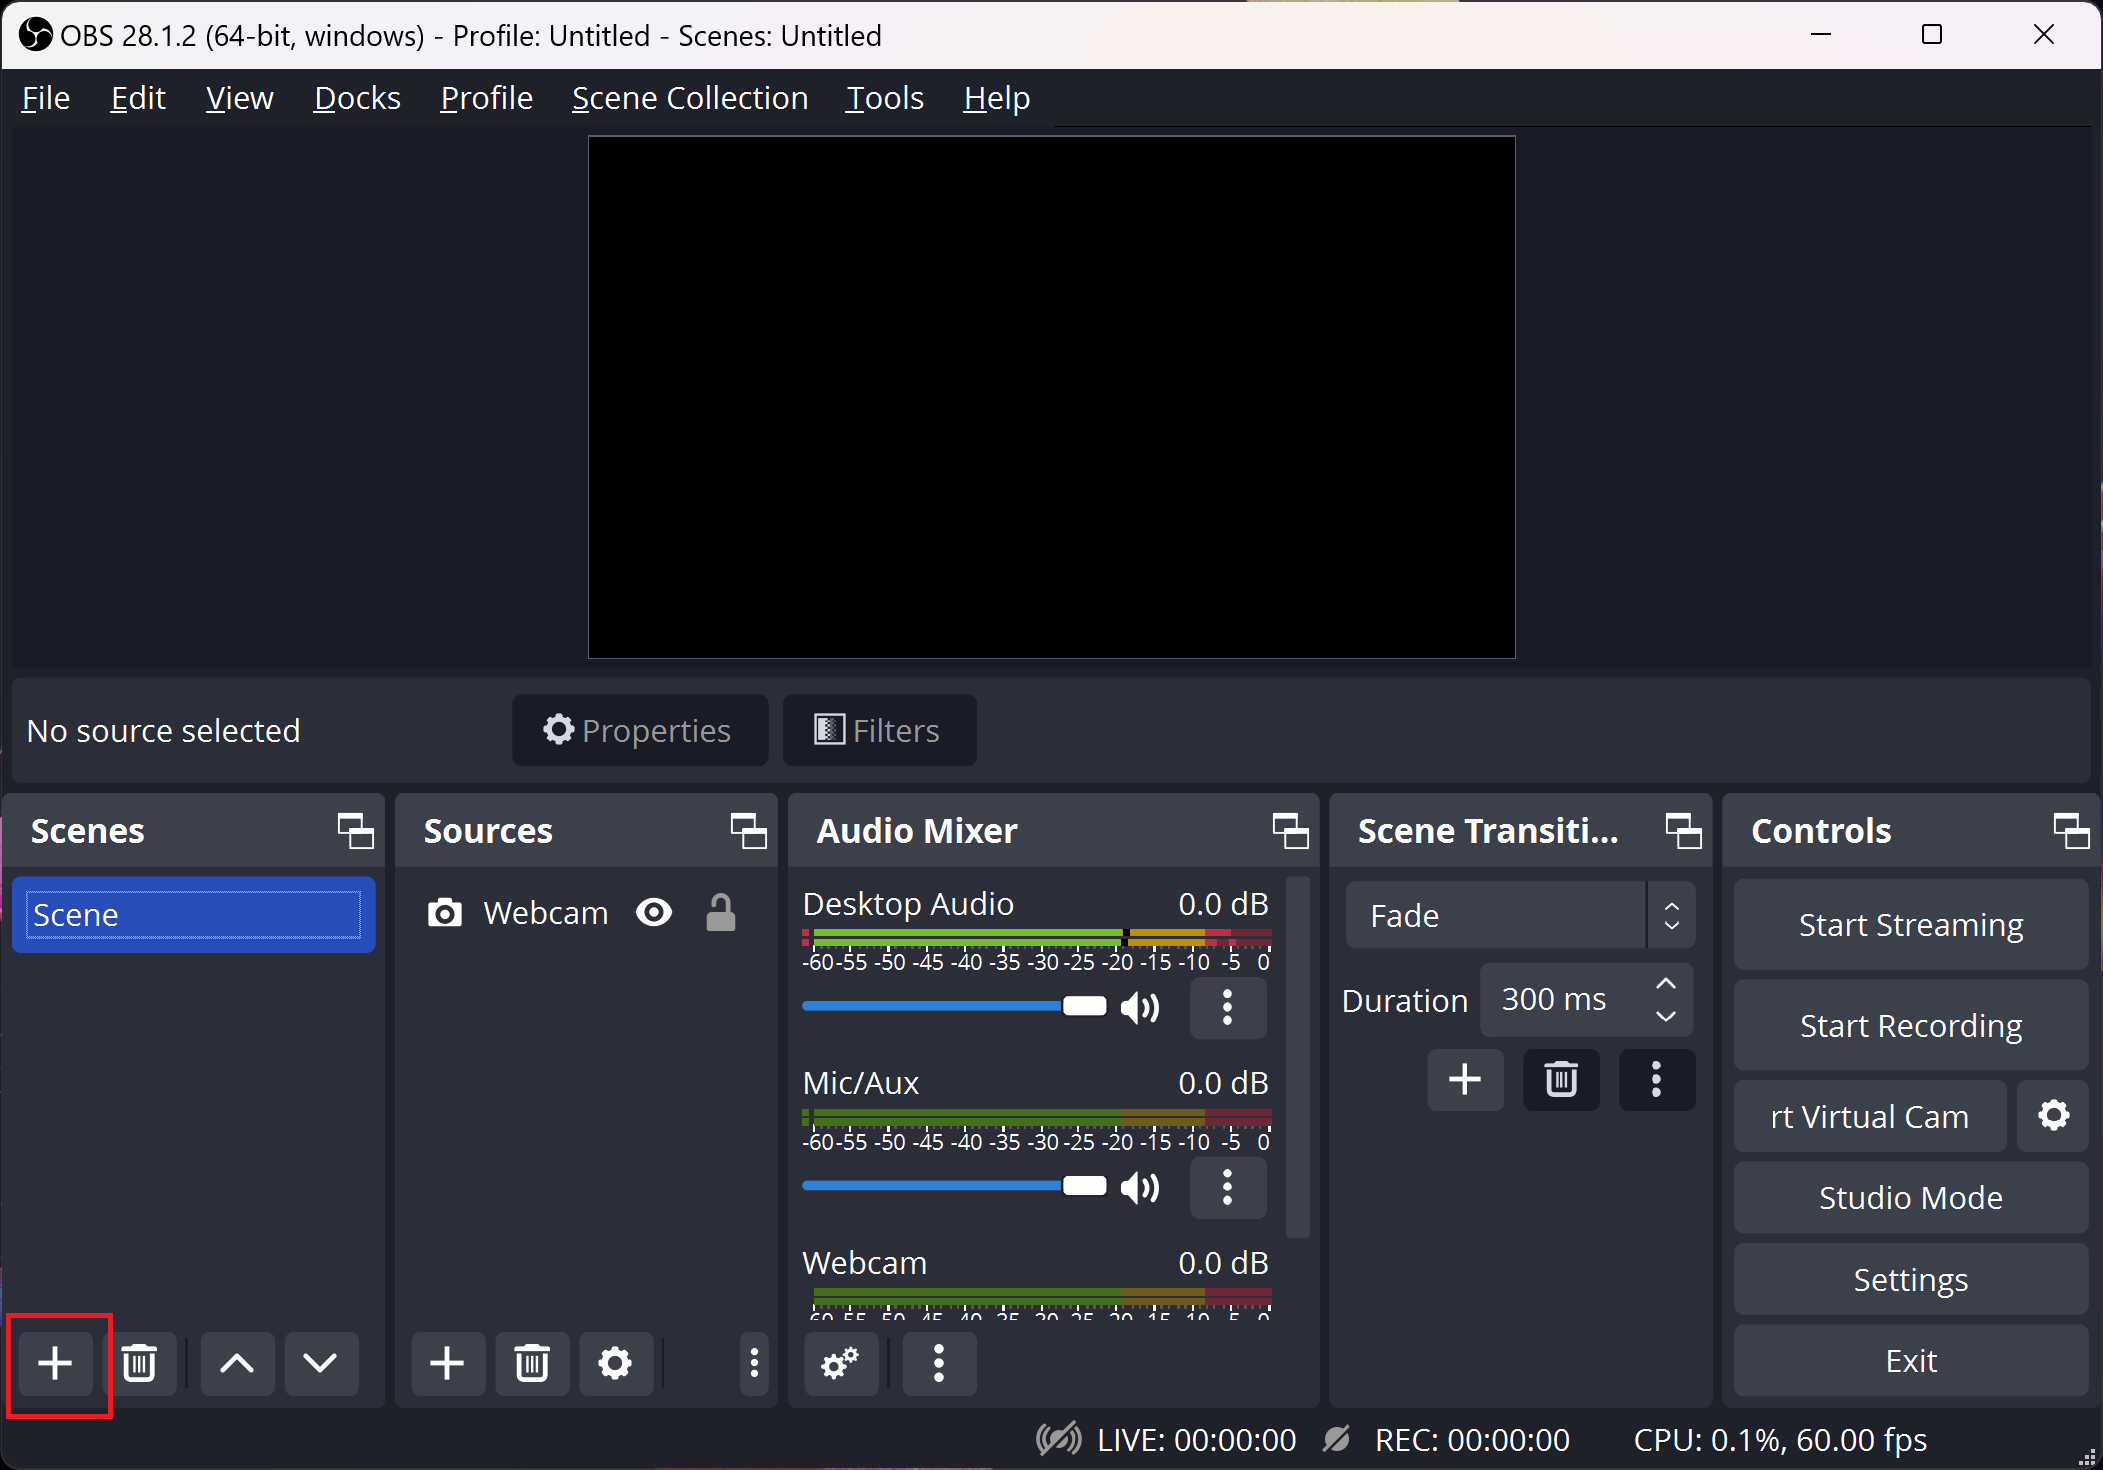 OBS Studio, showing the "+" button to create a new scene, in the Scenes UI container.